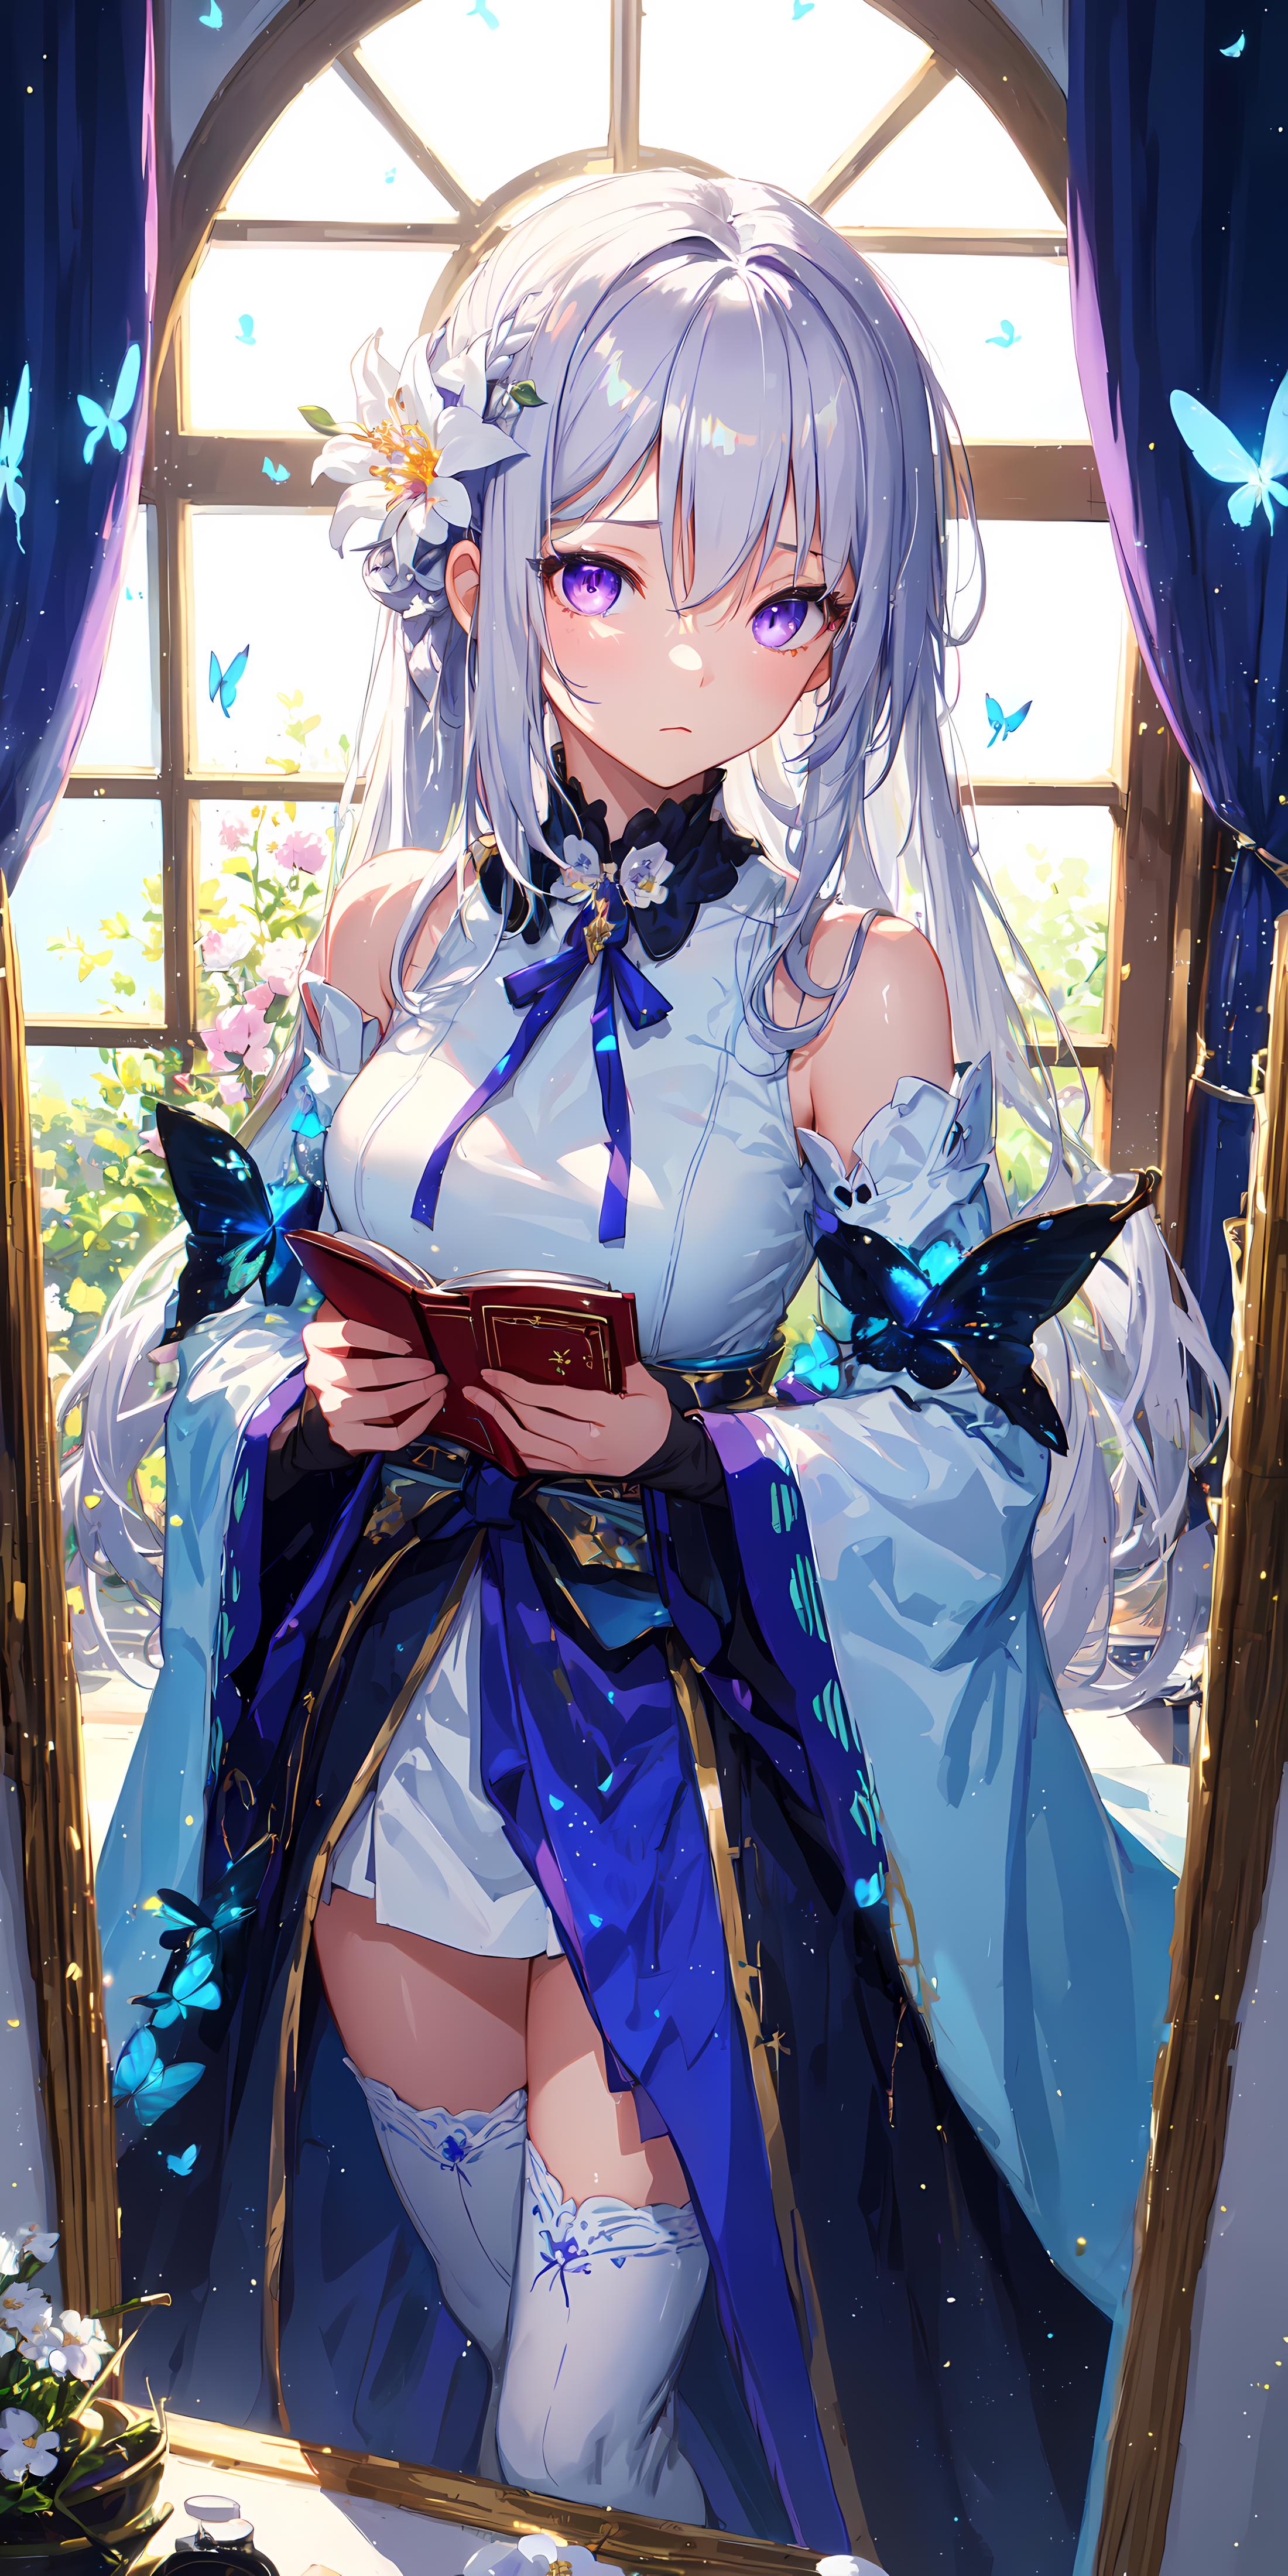 A White and Blue Anime Character Reading a Book.